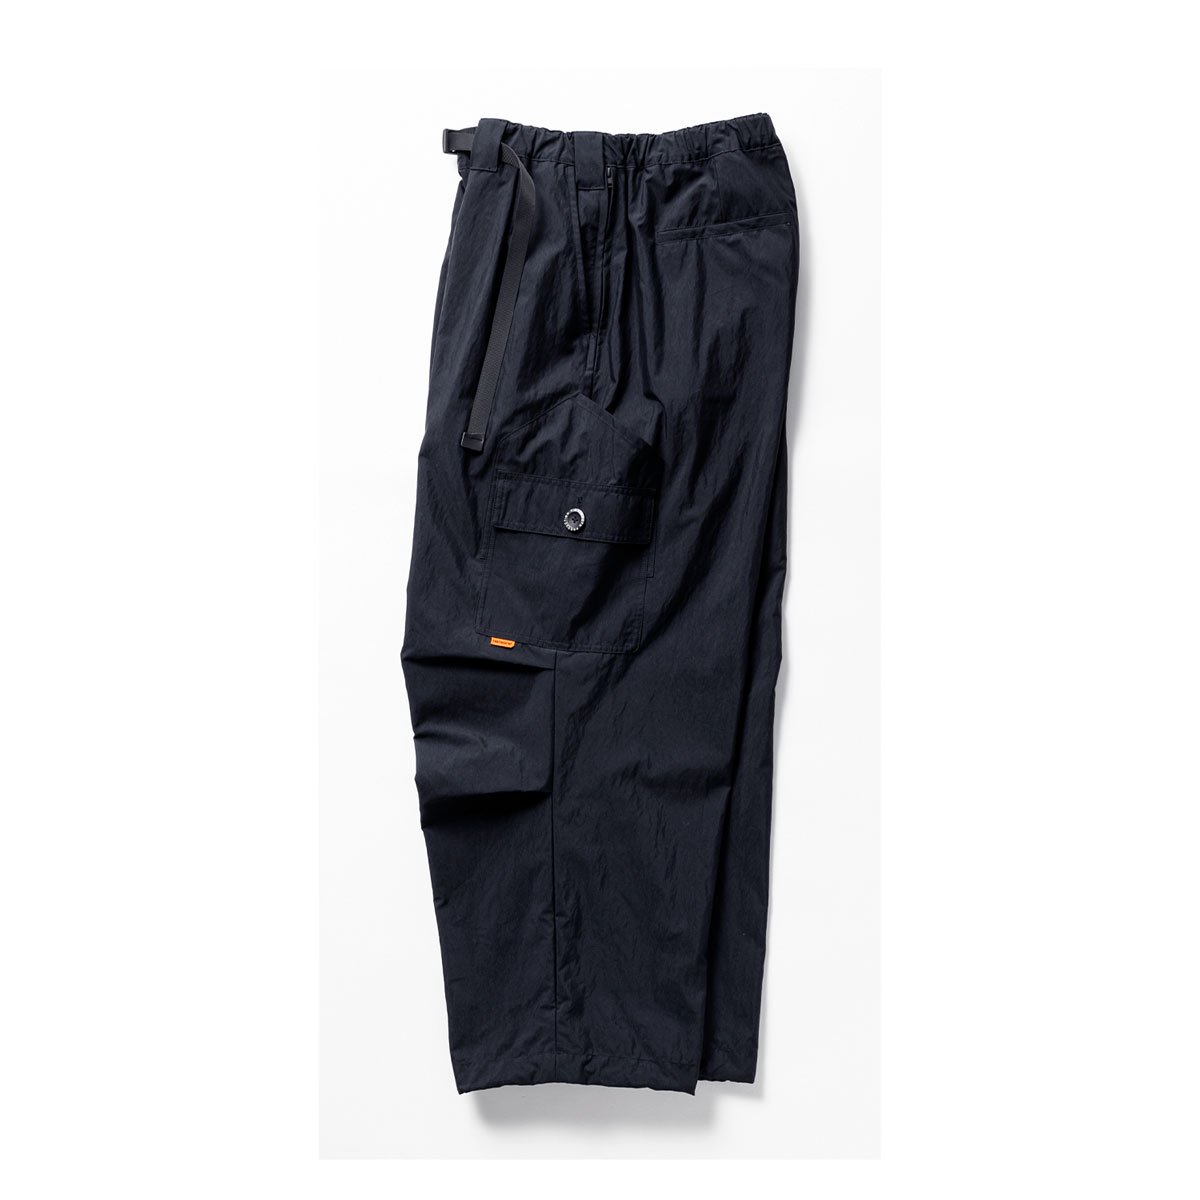 TIGHTBOOTH - HUNTING CARGO PANTS - SHRED